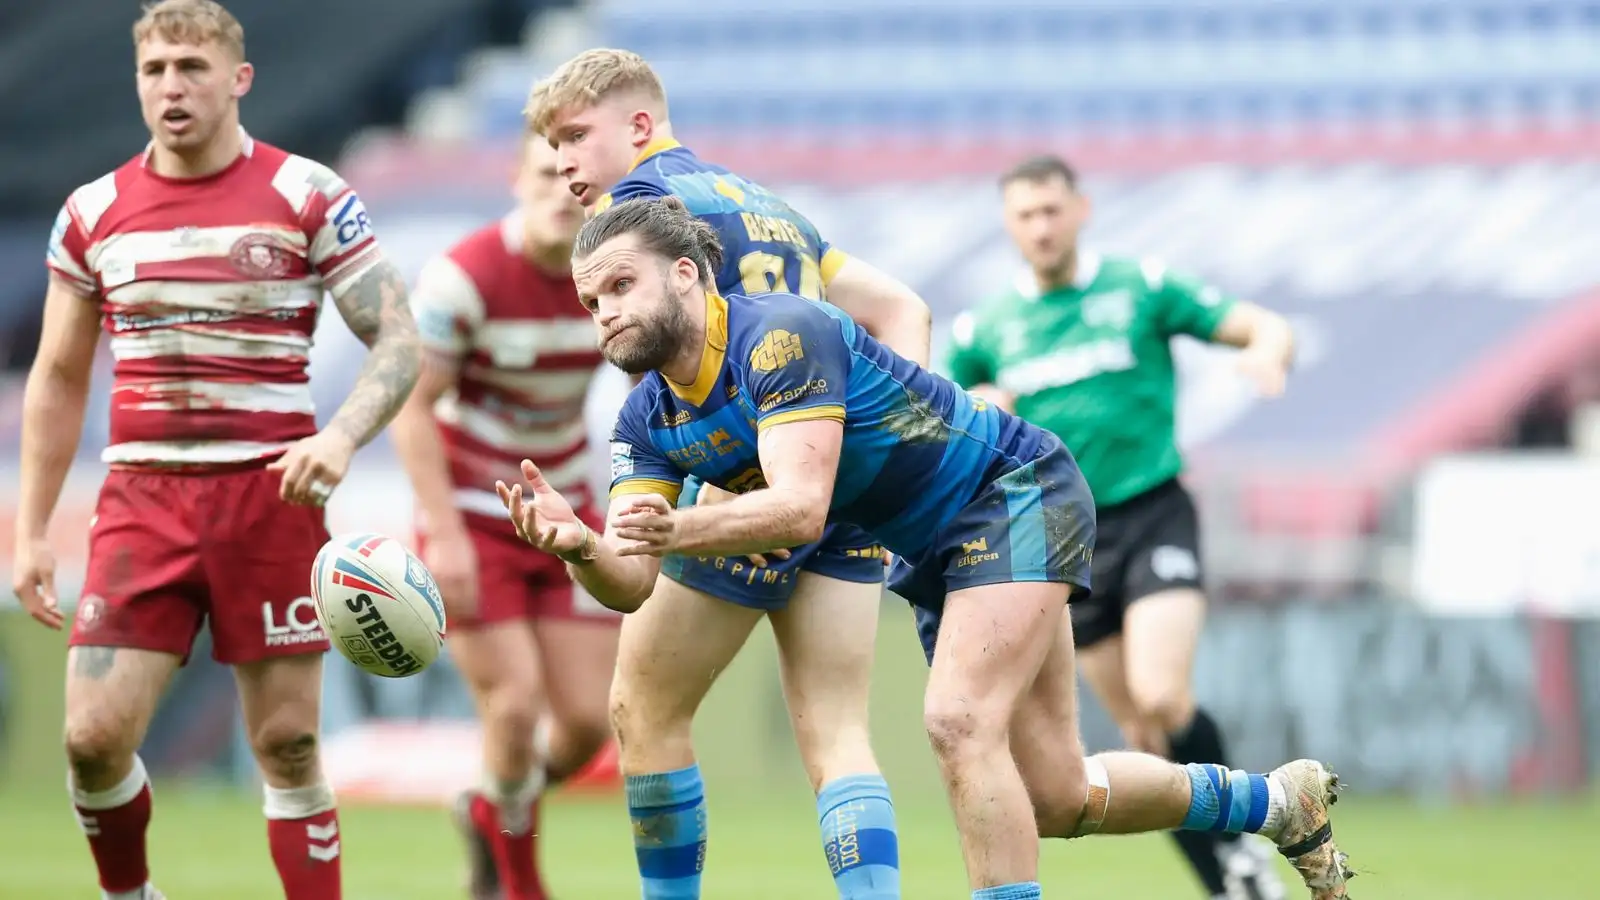 More bad news for Wakefield as utility suffers early injury blow against Warrington